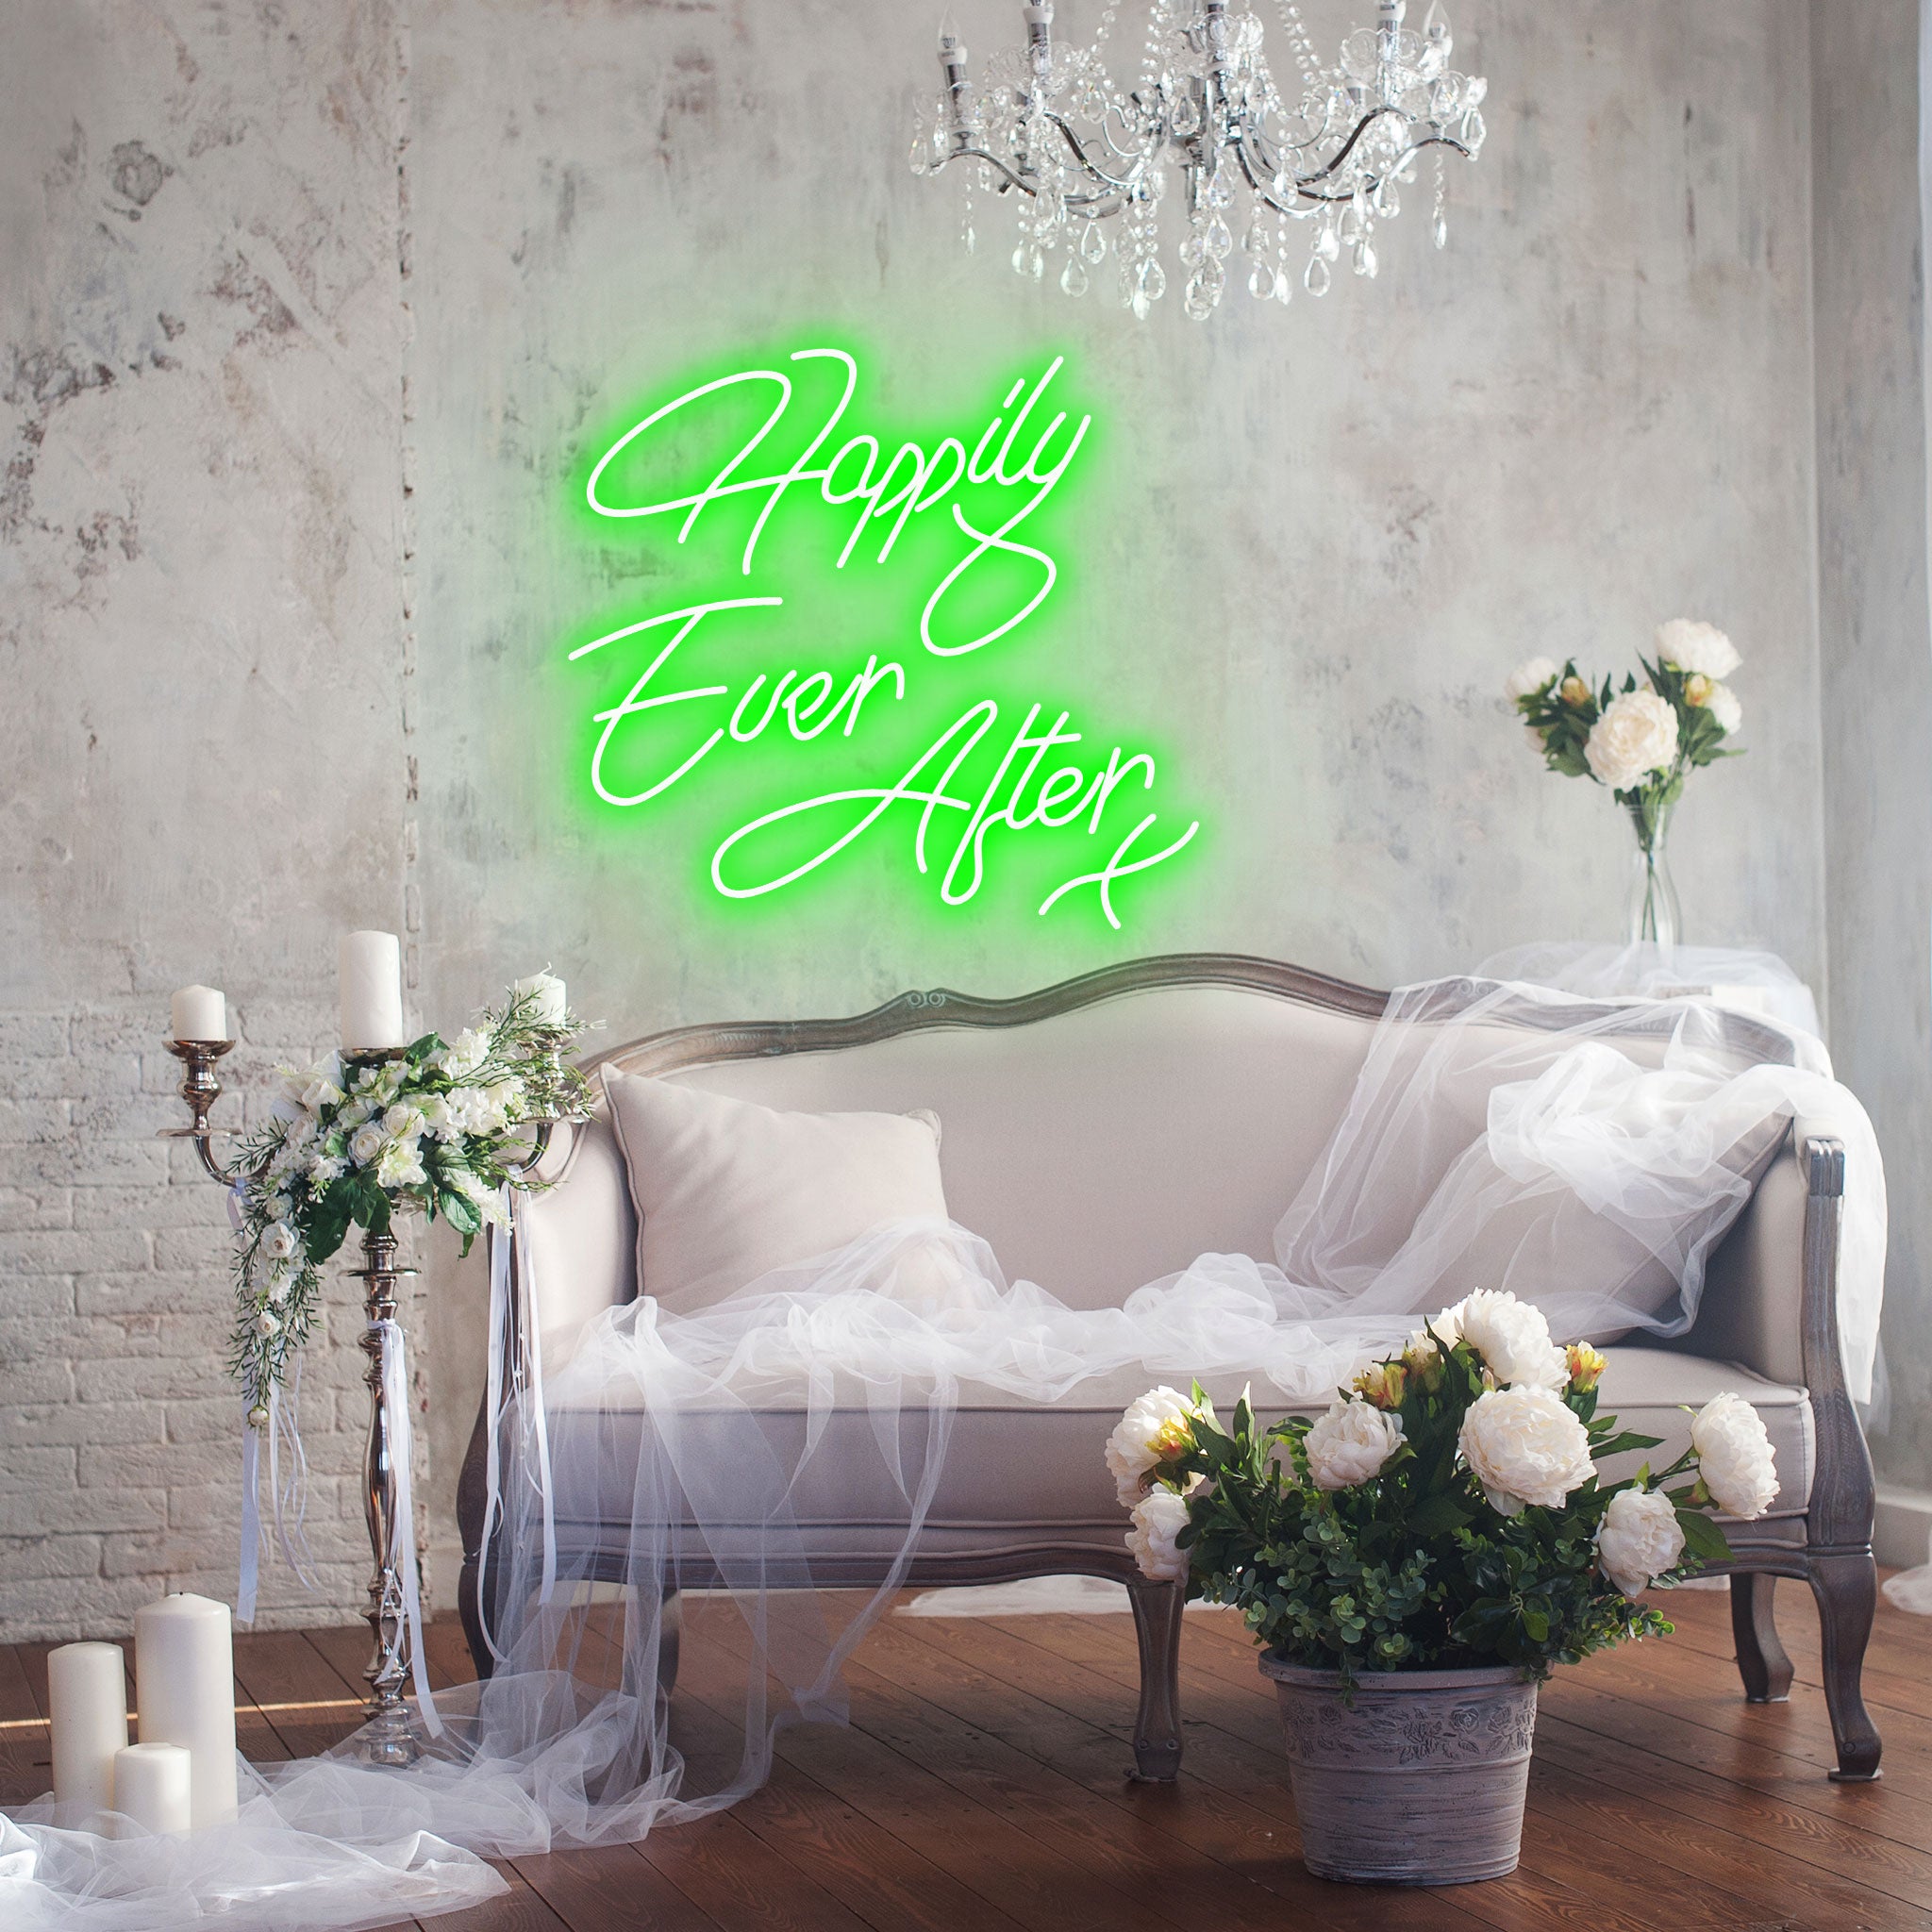 Happily Ever After - Neon Sign - Wedding Engagement Event